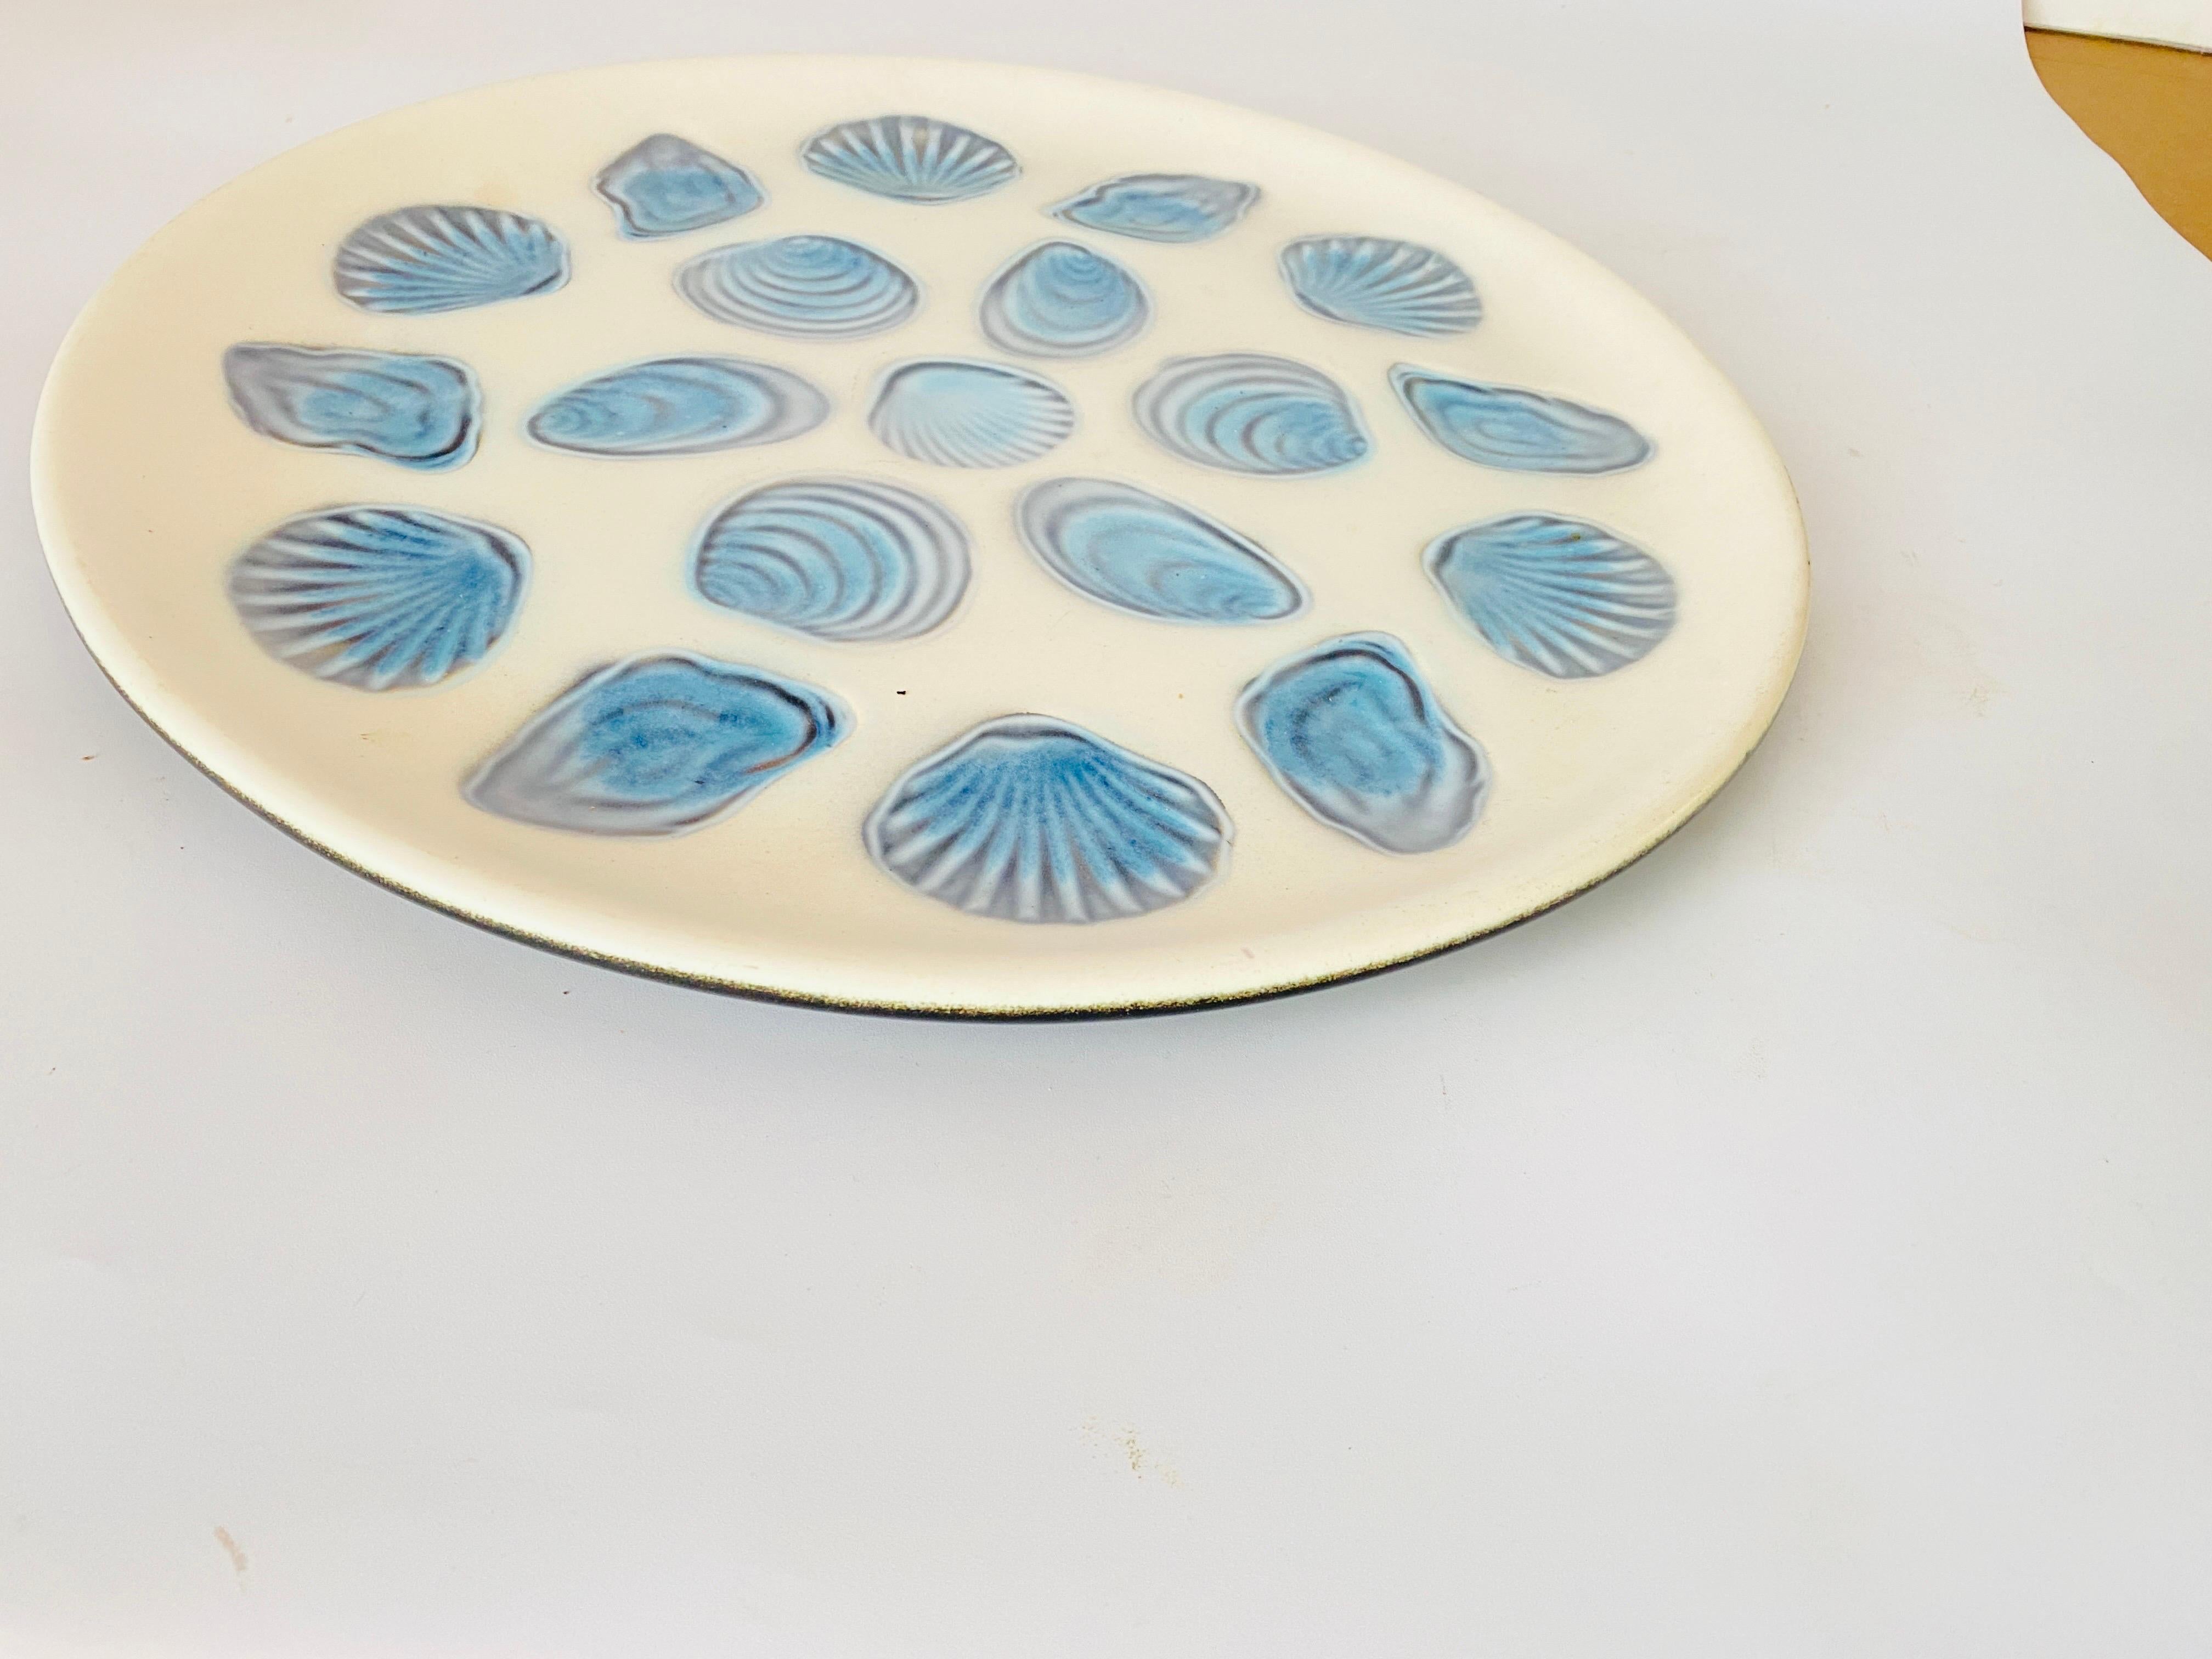 Large Oyster Plate in Ceramic Blue and White Color, 1960 France by Elchinger For Sale 3